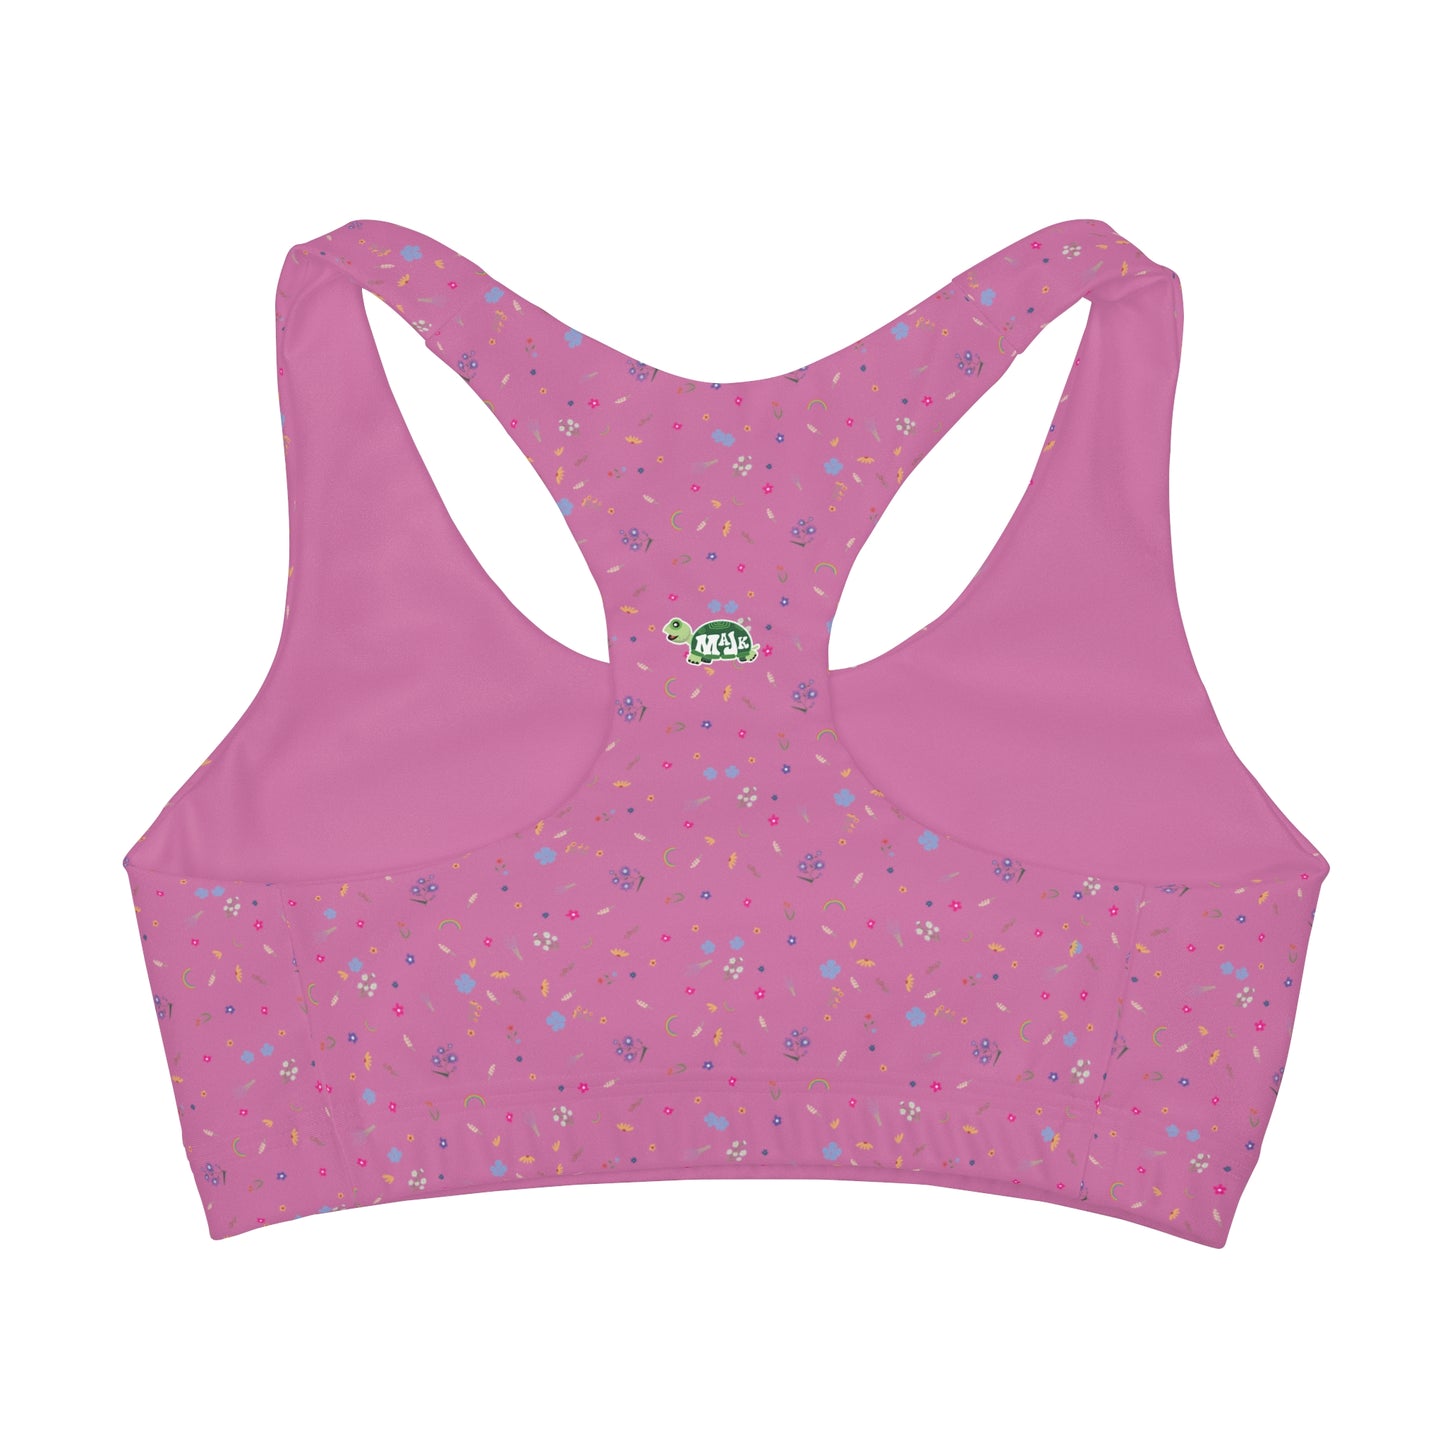 Girls' Double Lined Seamless Sports Bra- Over the Rainbow" flower pattern (Pink)